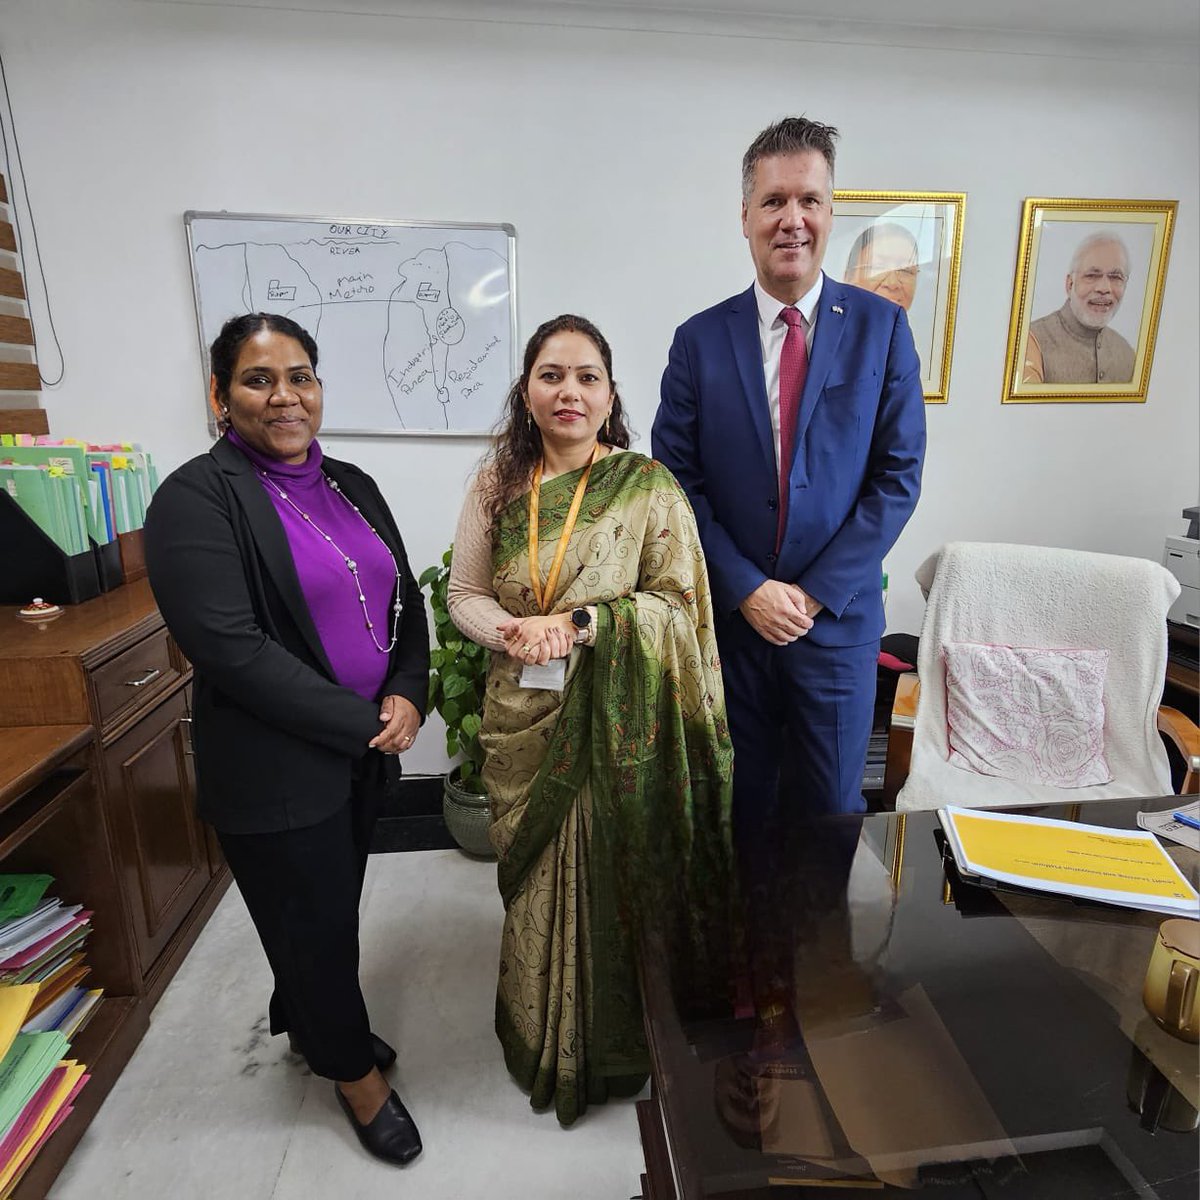 It was good to meet with @ruchika @moefcc and discuss approaches to accelerate #LeadIT, an initiative launched by our Prime Ministers at #COP28